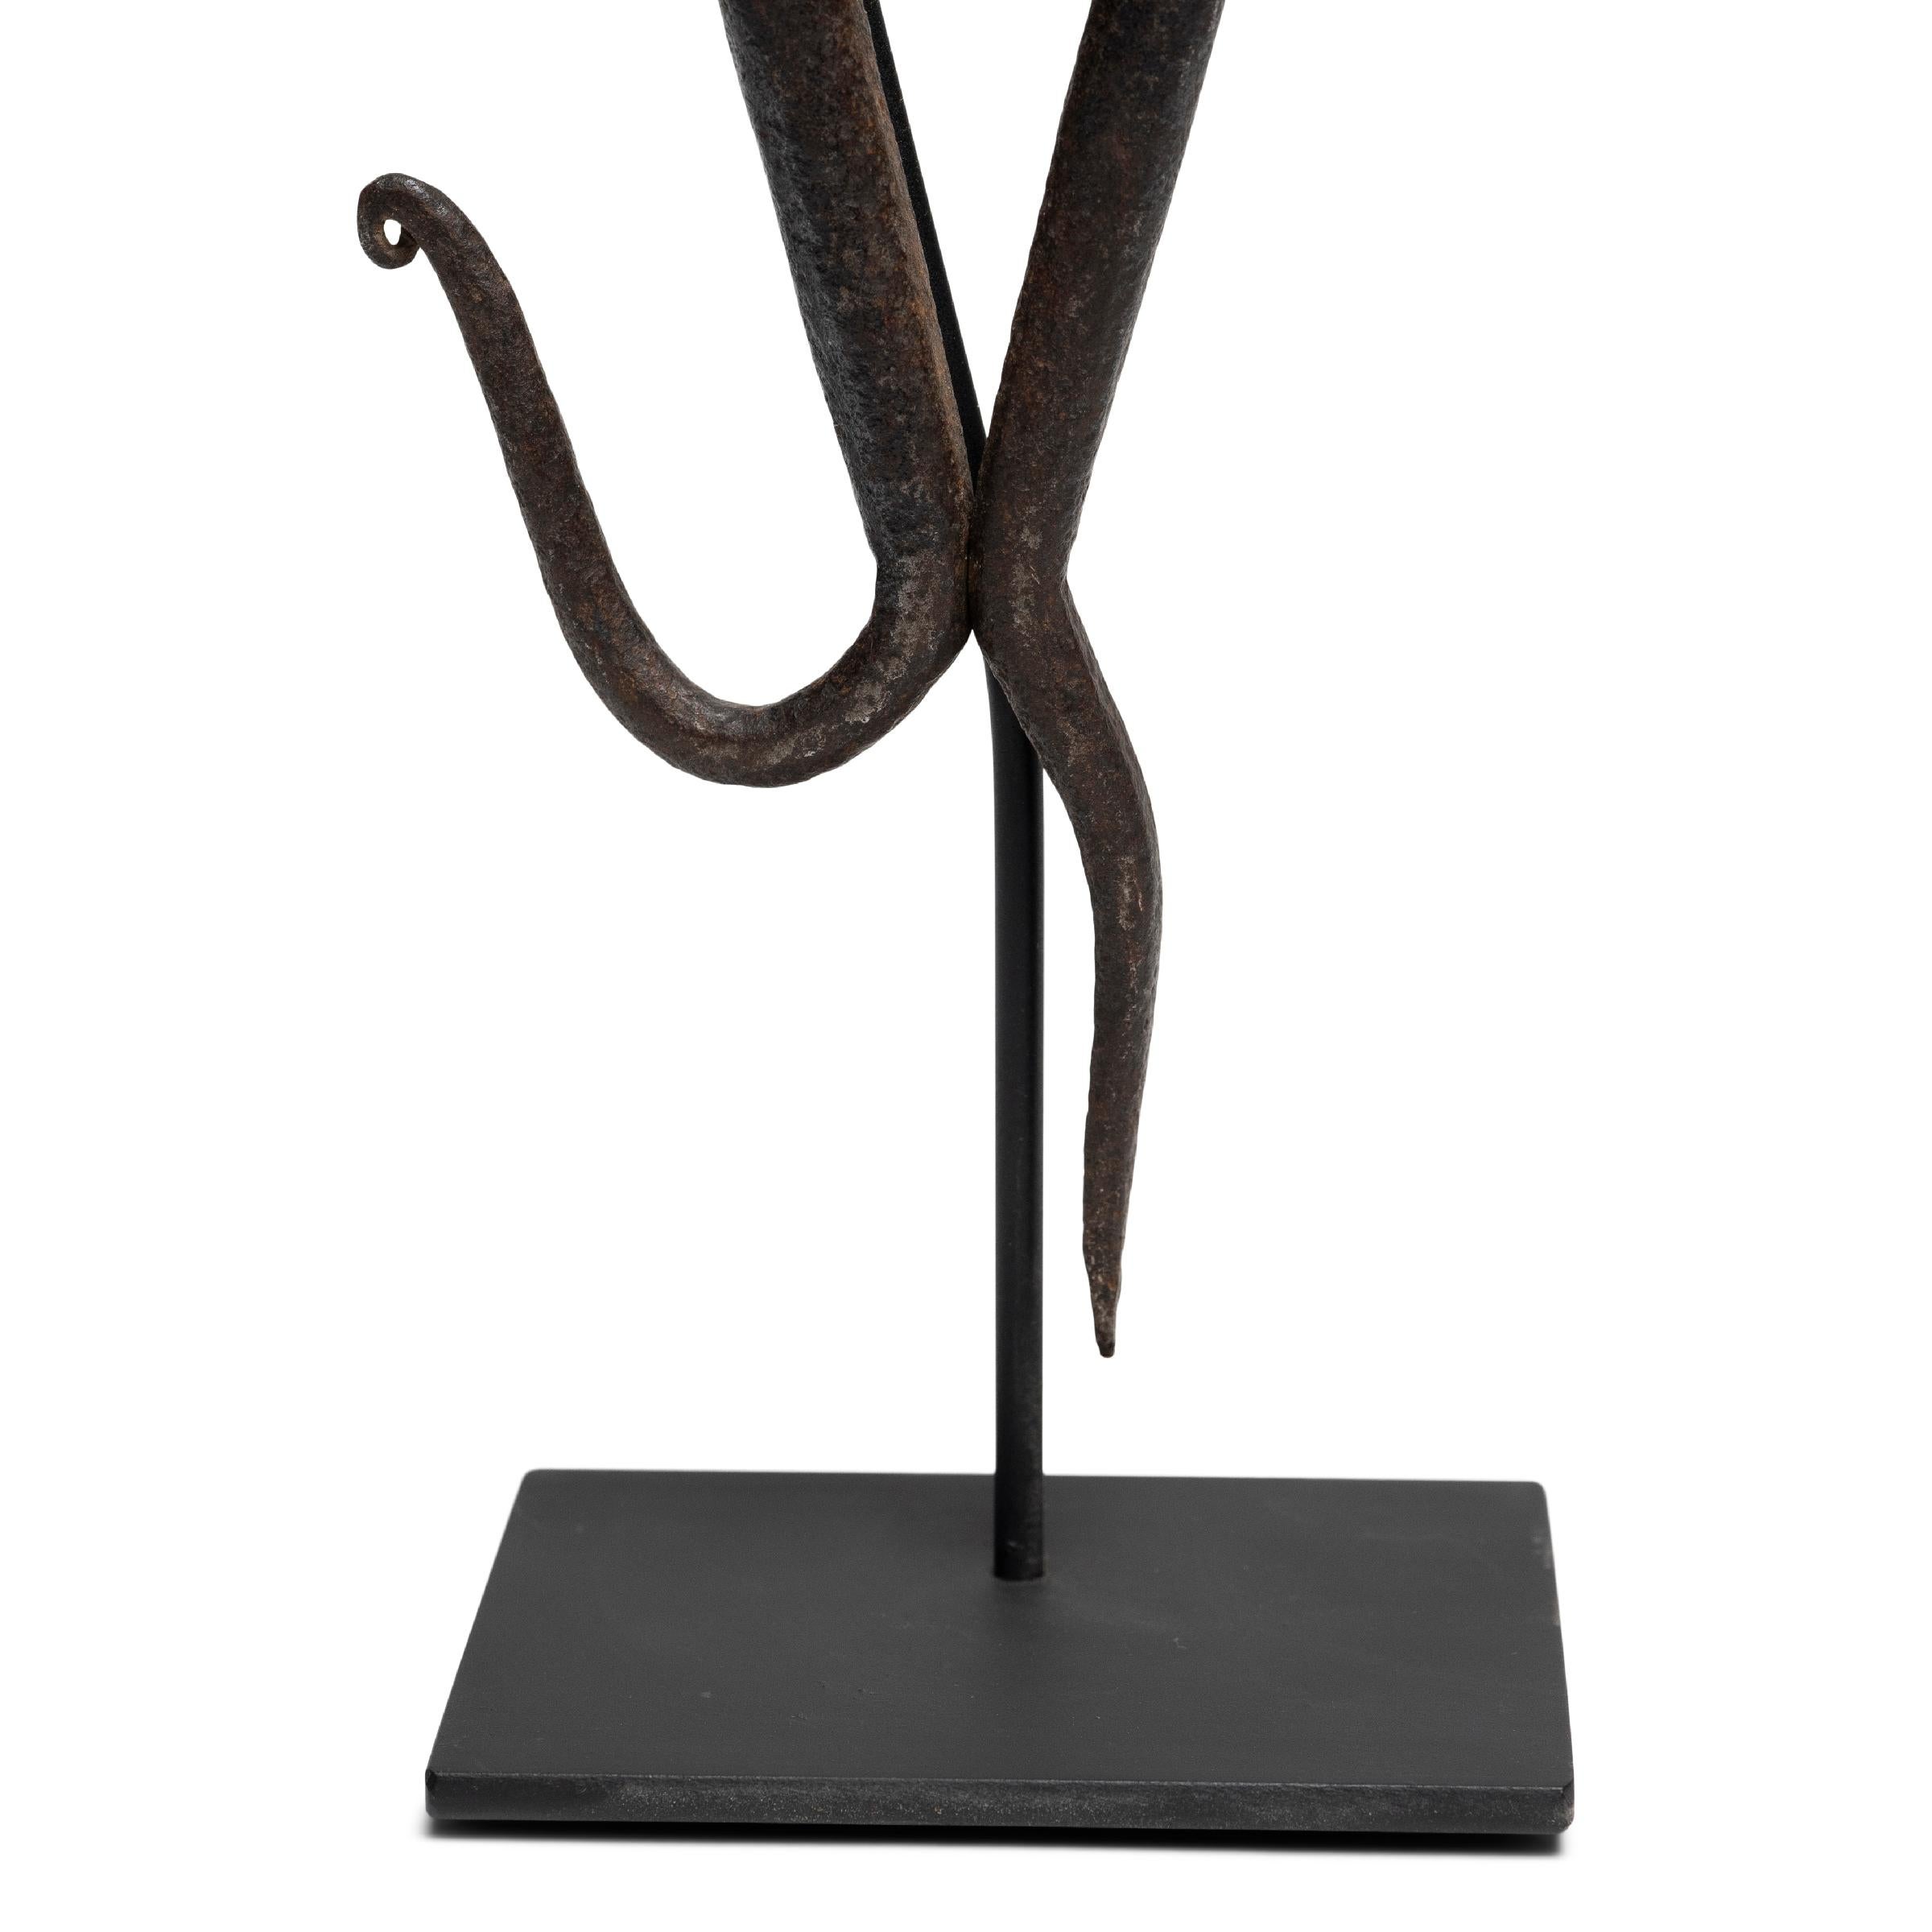 This hand-forged metal sculpture, with its delicate appearance and whimsical shape, was once an integral tool to a 19th century Chinese cobbler’s trade. Made of iron, these scissors were fashioned in a way to effectively cut and shape leather,